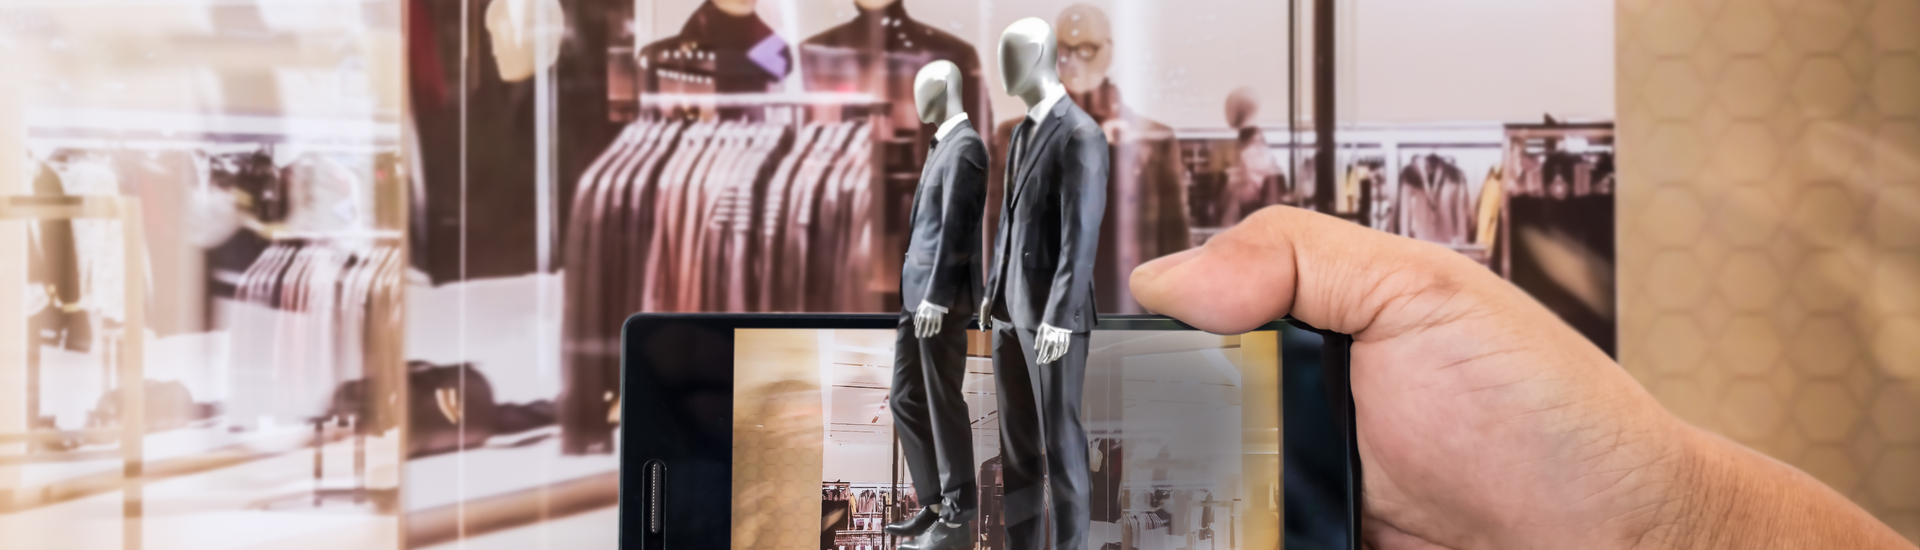 Augmented Reality and its applications in Marketing